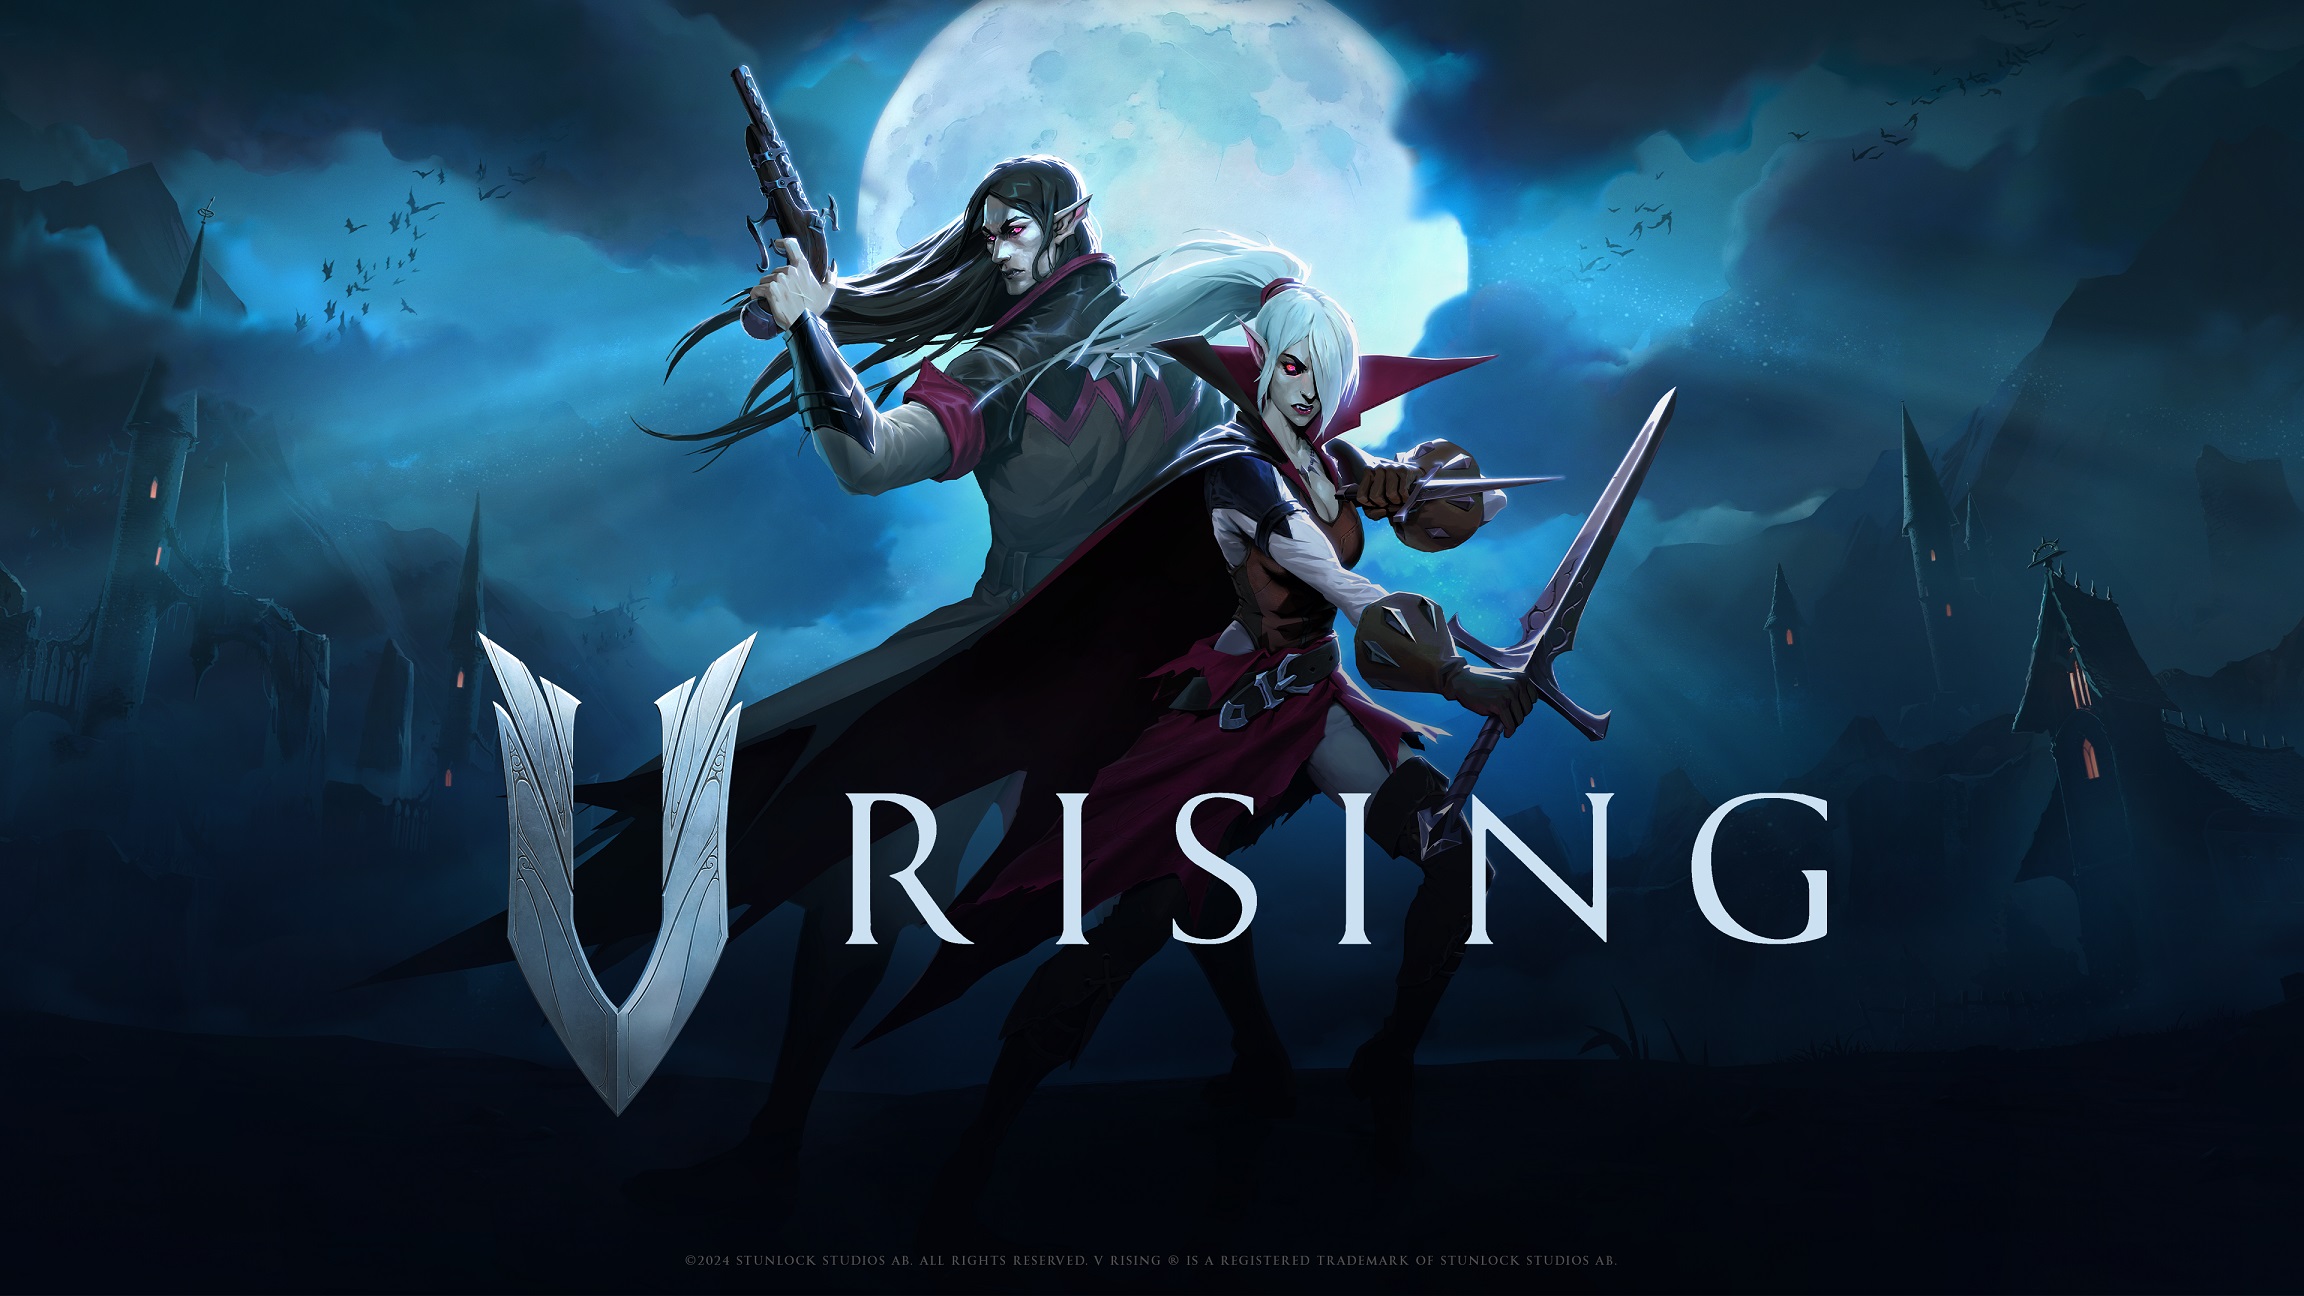 Live your best vampire life in V Rising, 1.0 version out now on PC